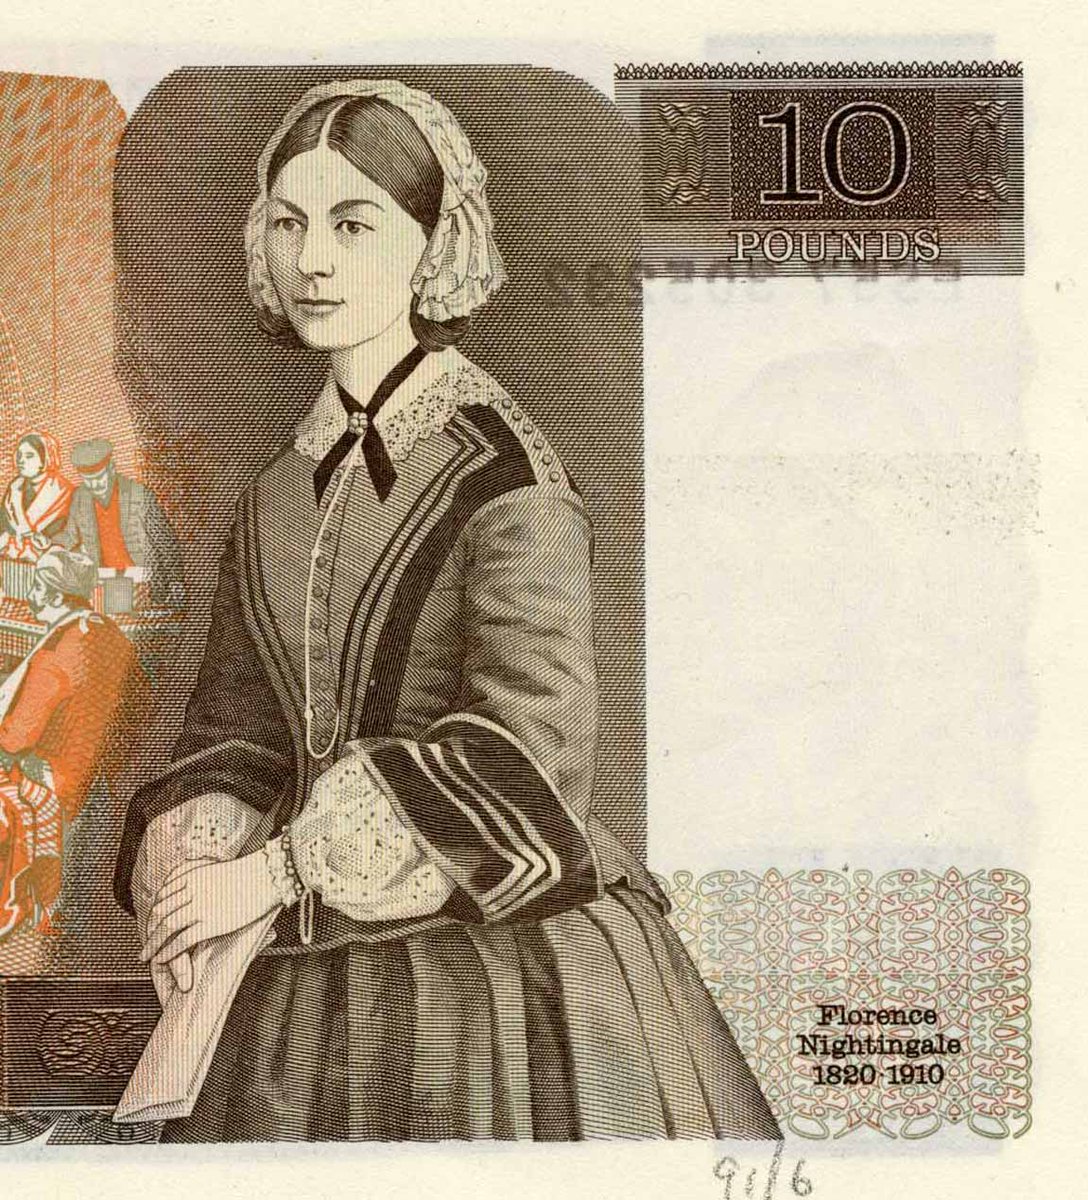 #FlorenceNightingale was born #OTD in 1820 and was the first woman to appear on Bank of England banknotes. Take a look at the various stages of designing her portrait, from source photo to the final design.